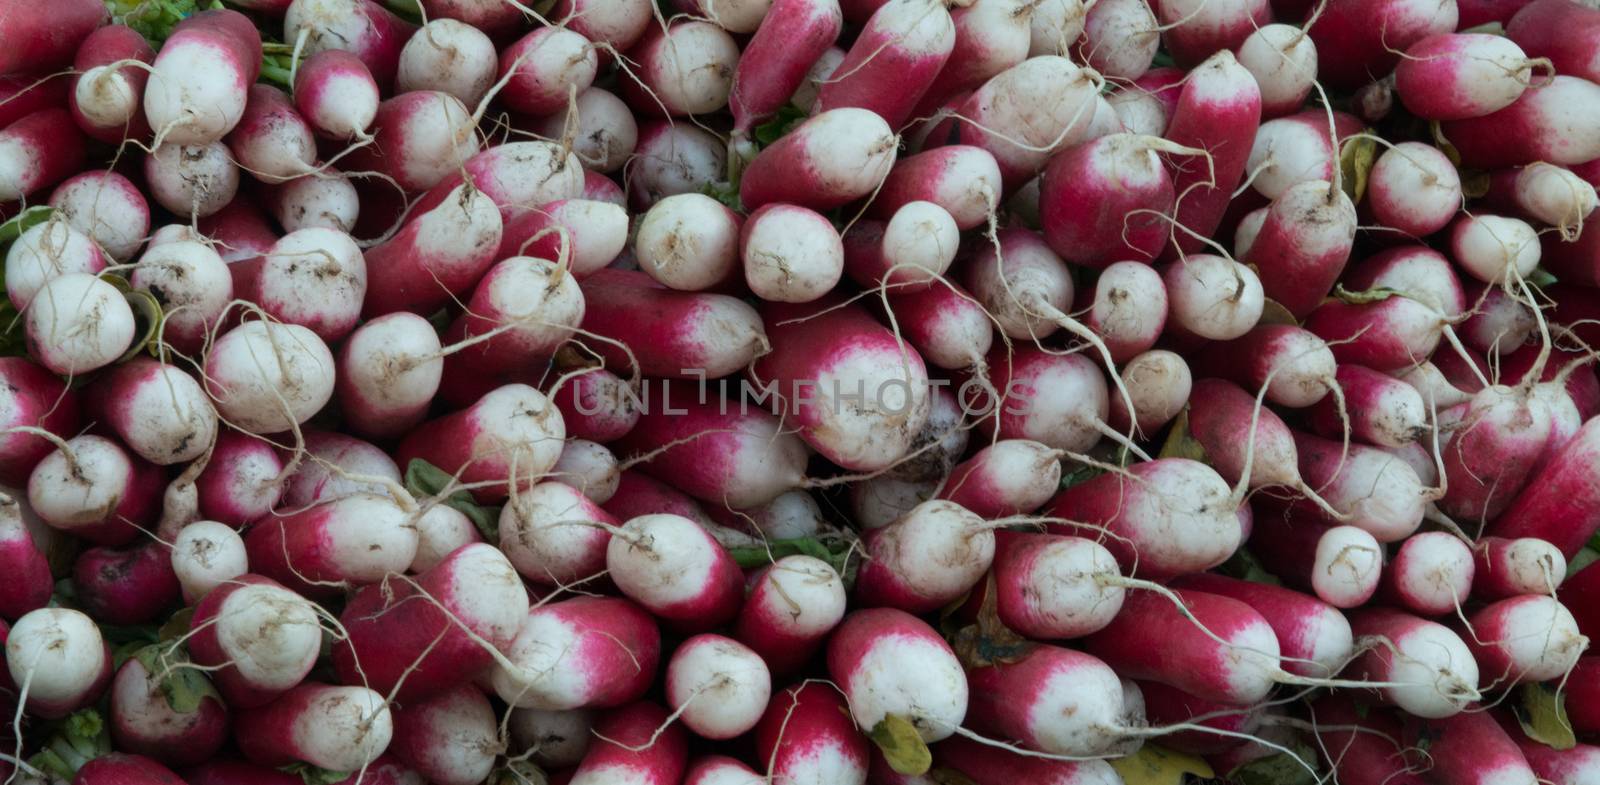 Radishes on a Market Stall